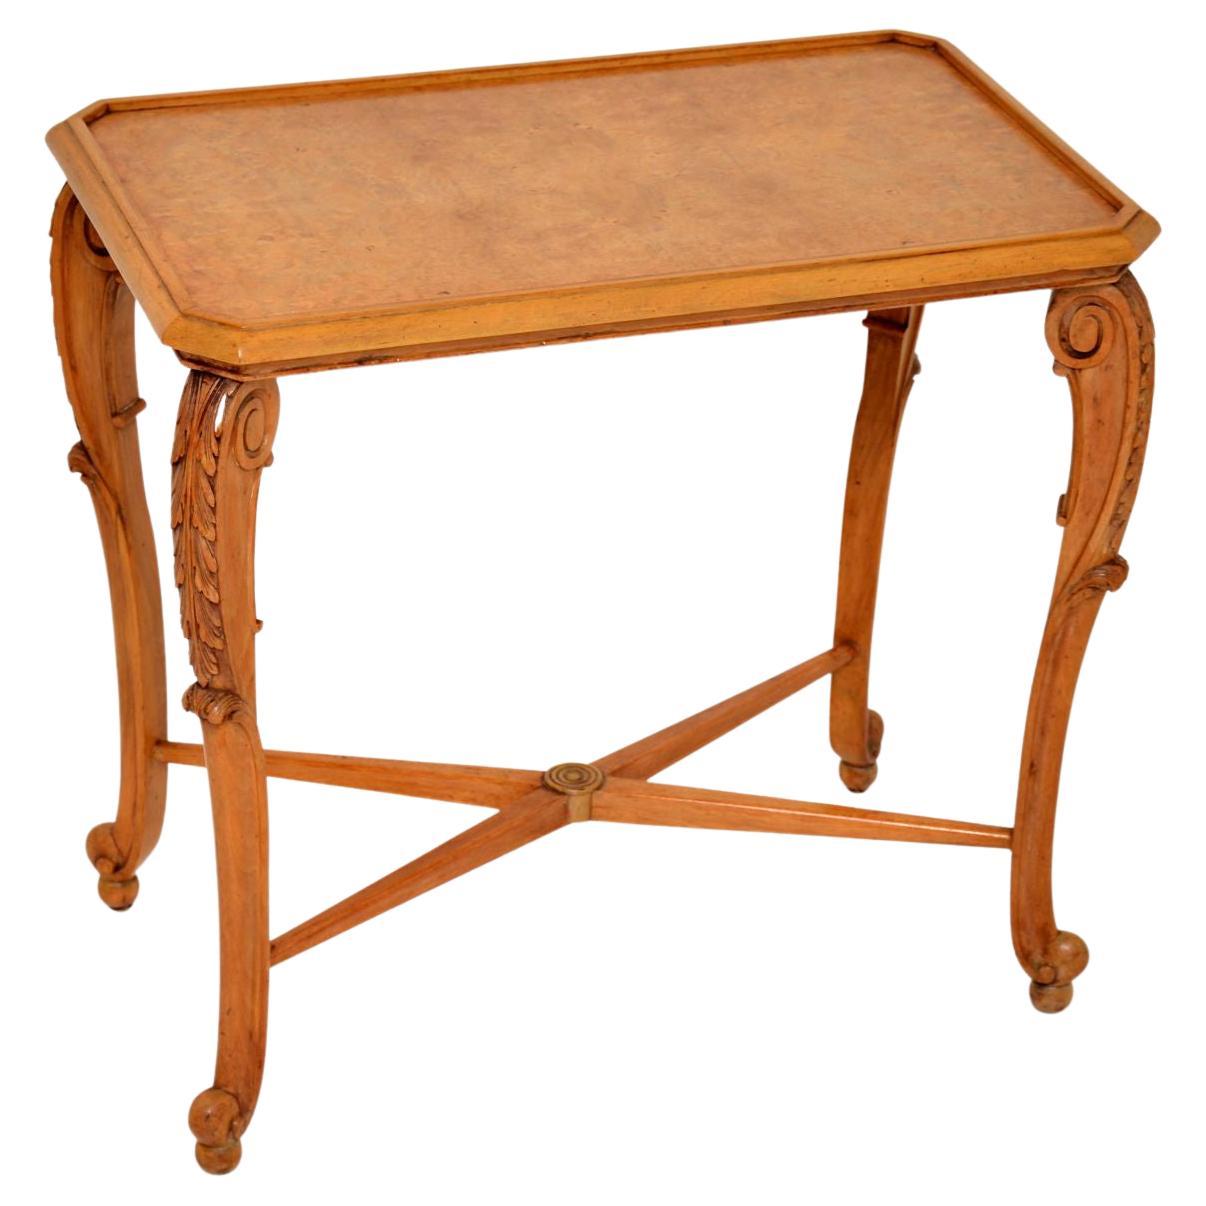 Antique Burr Walnut Side Table by Hille